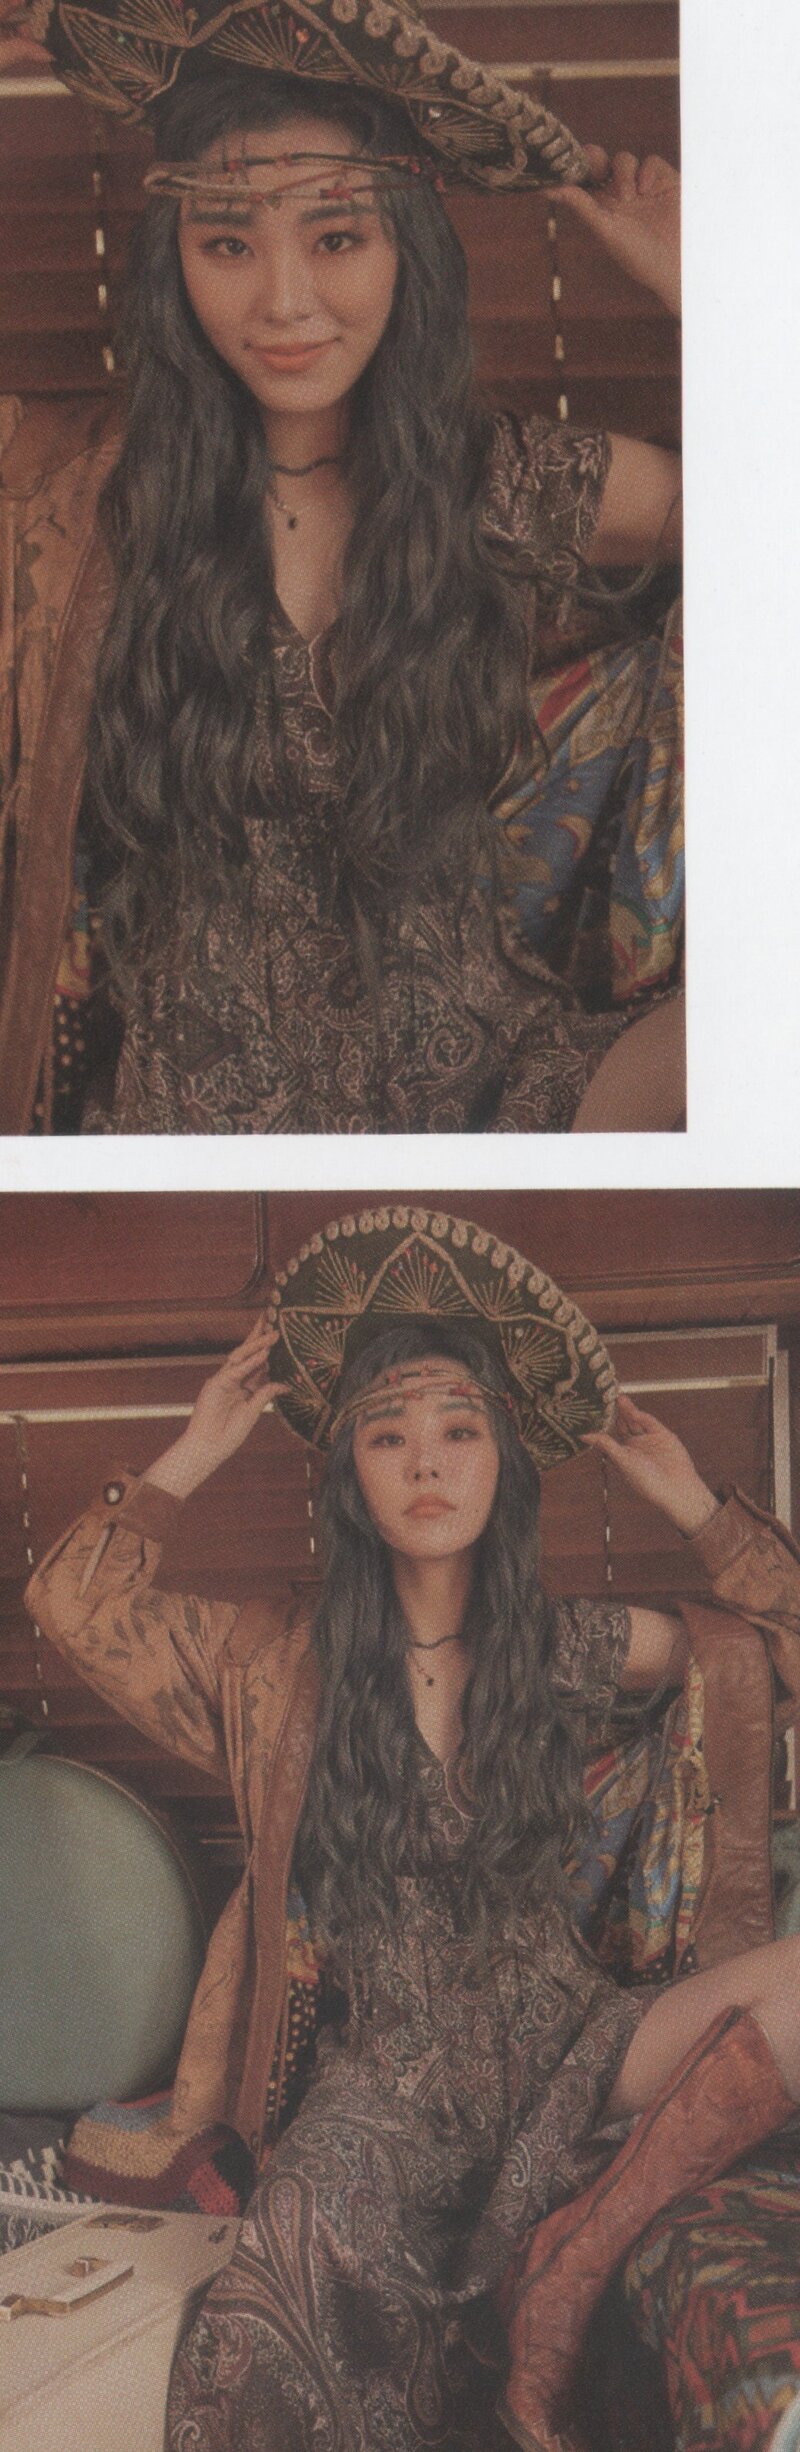 MAMAMOO 2nd Full Album 'reality in BLACK' [SCANS] (All Universes) documents 1